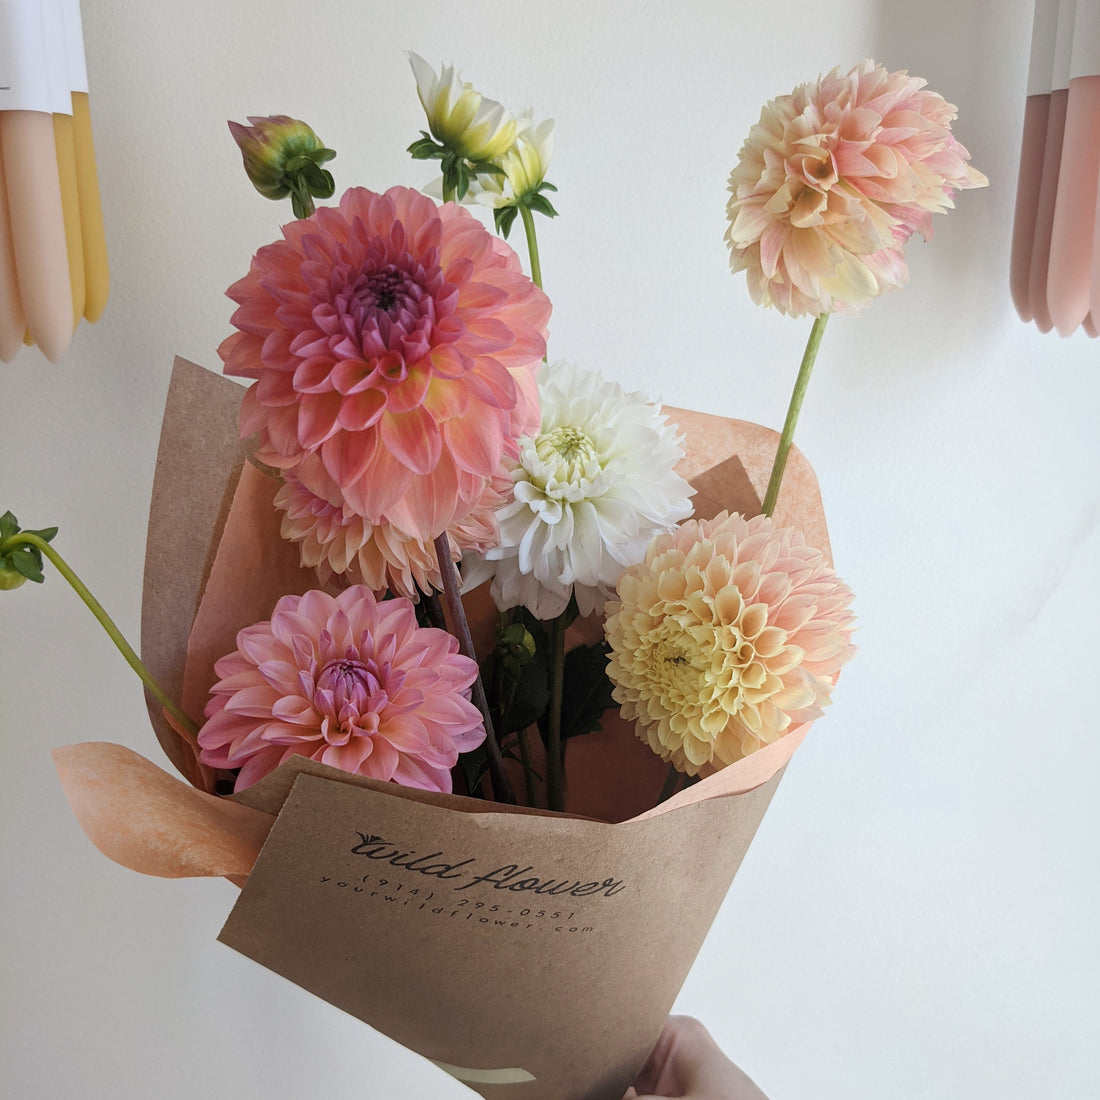 Monthly flower subscription service provided by Wild Flower in Hastings-on-Hudson, New York. Locally-sourced flowers from organic practiced farmers